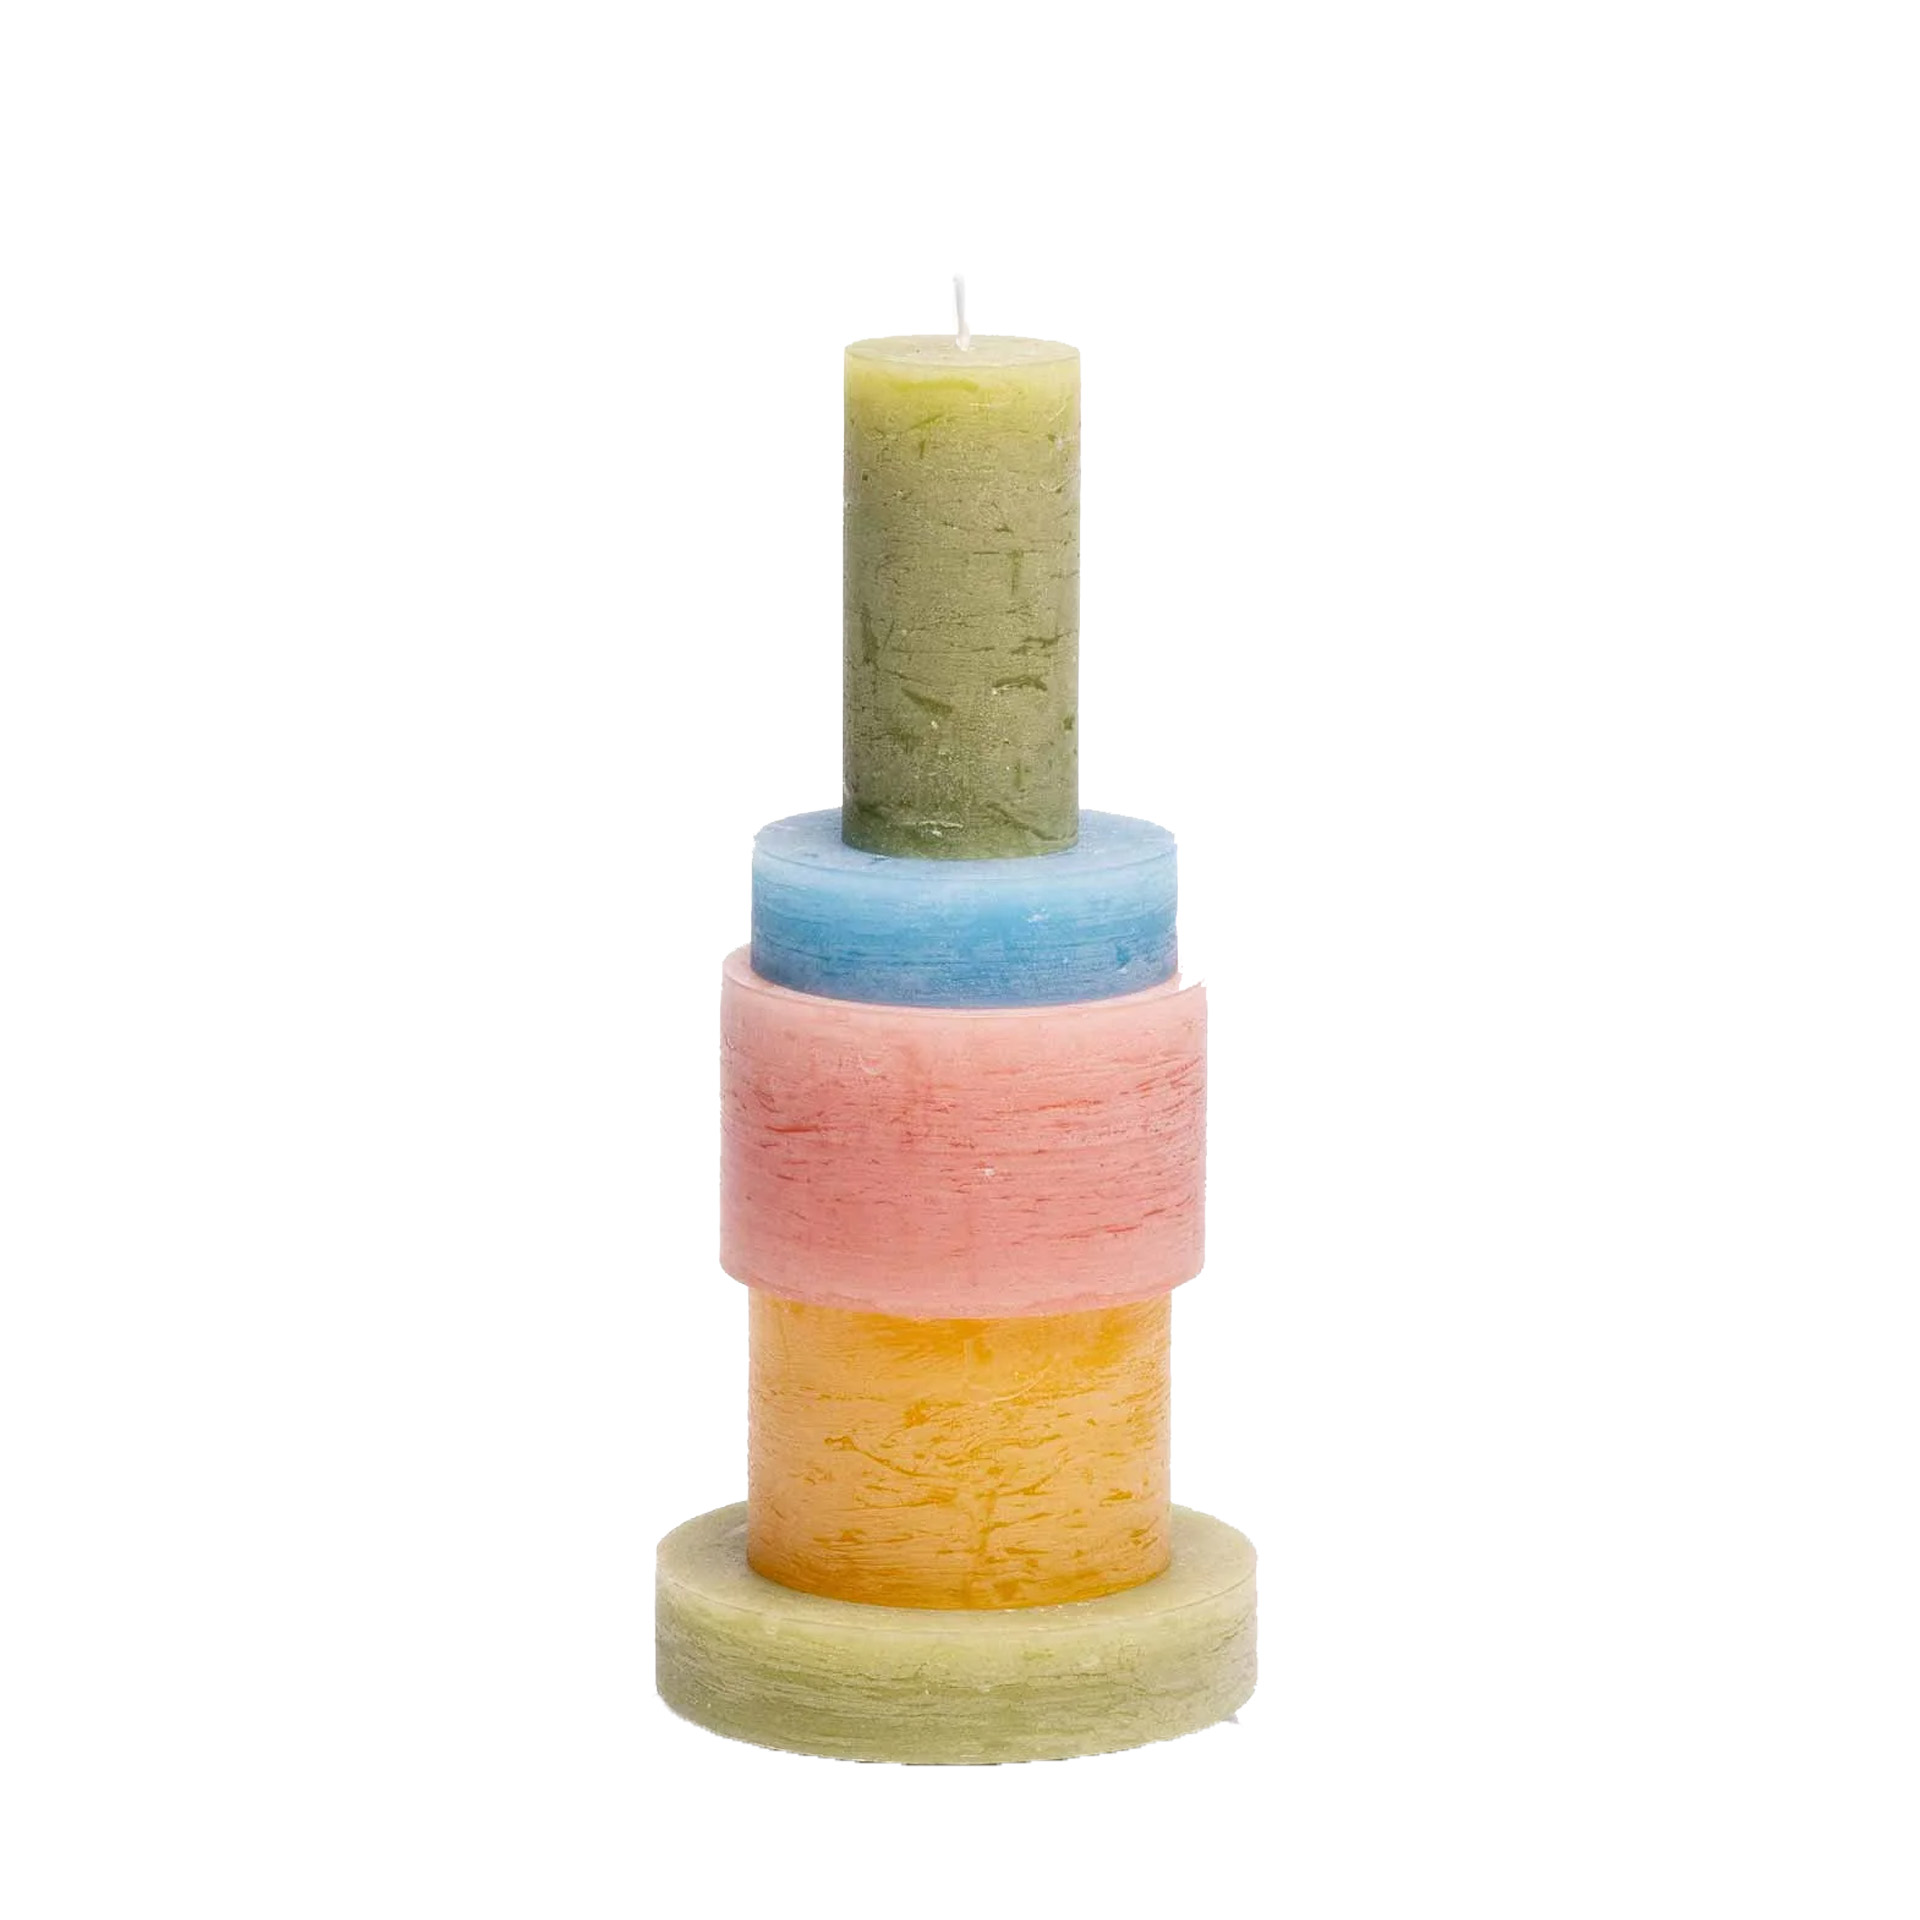 stan-editions-candle-stack-small-in-pink-and-yellow